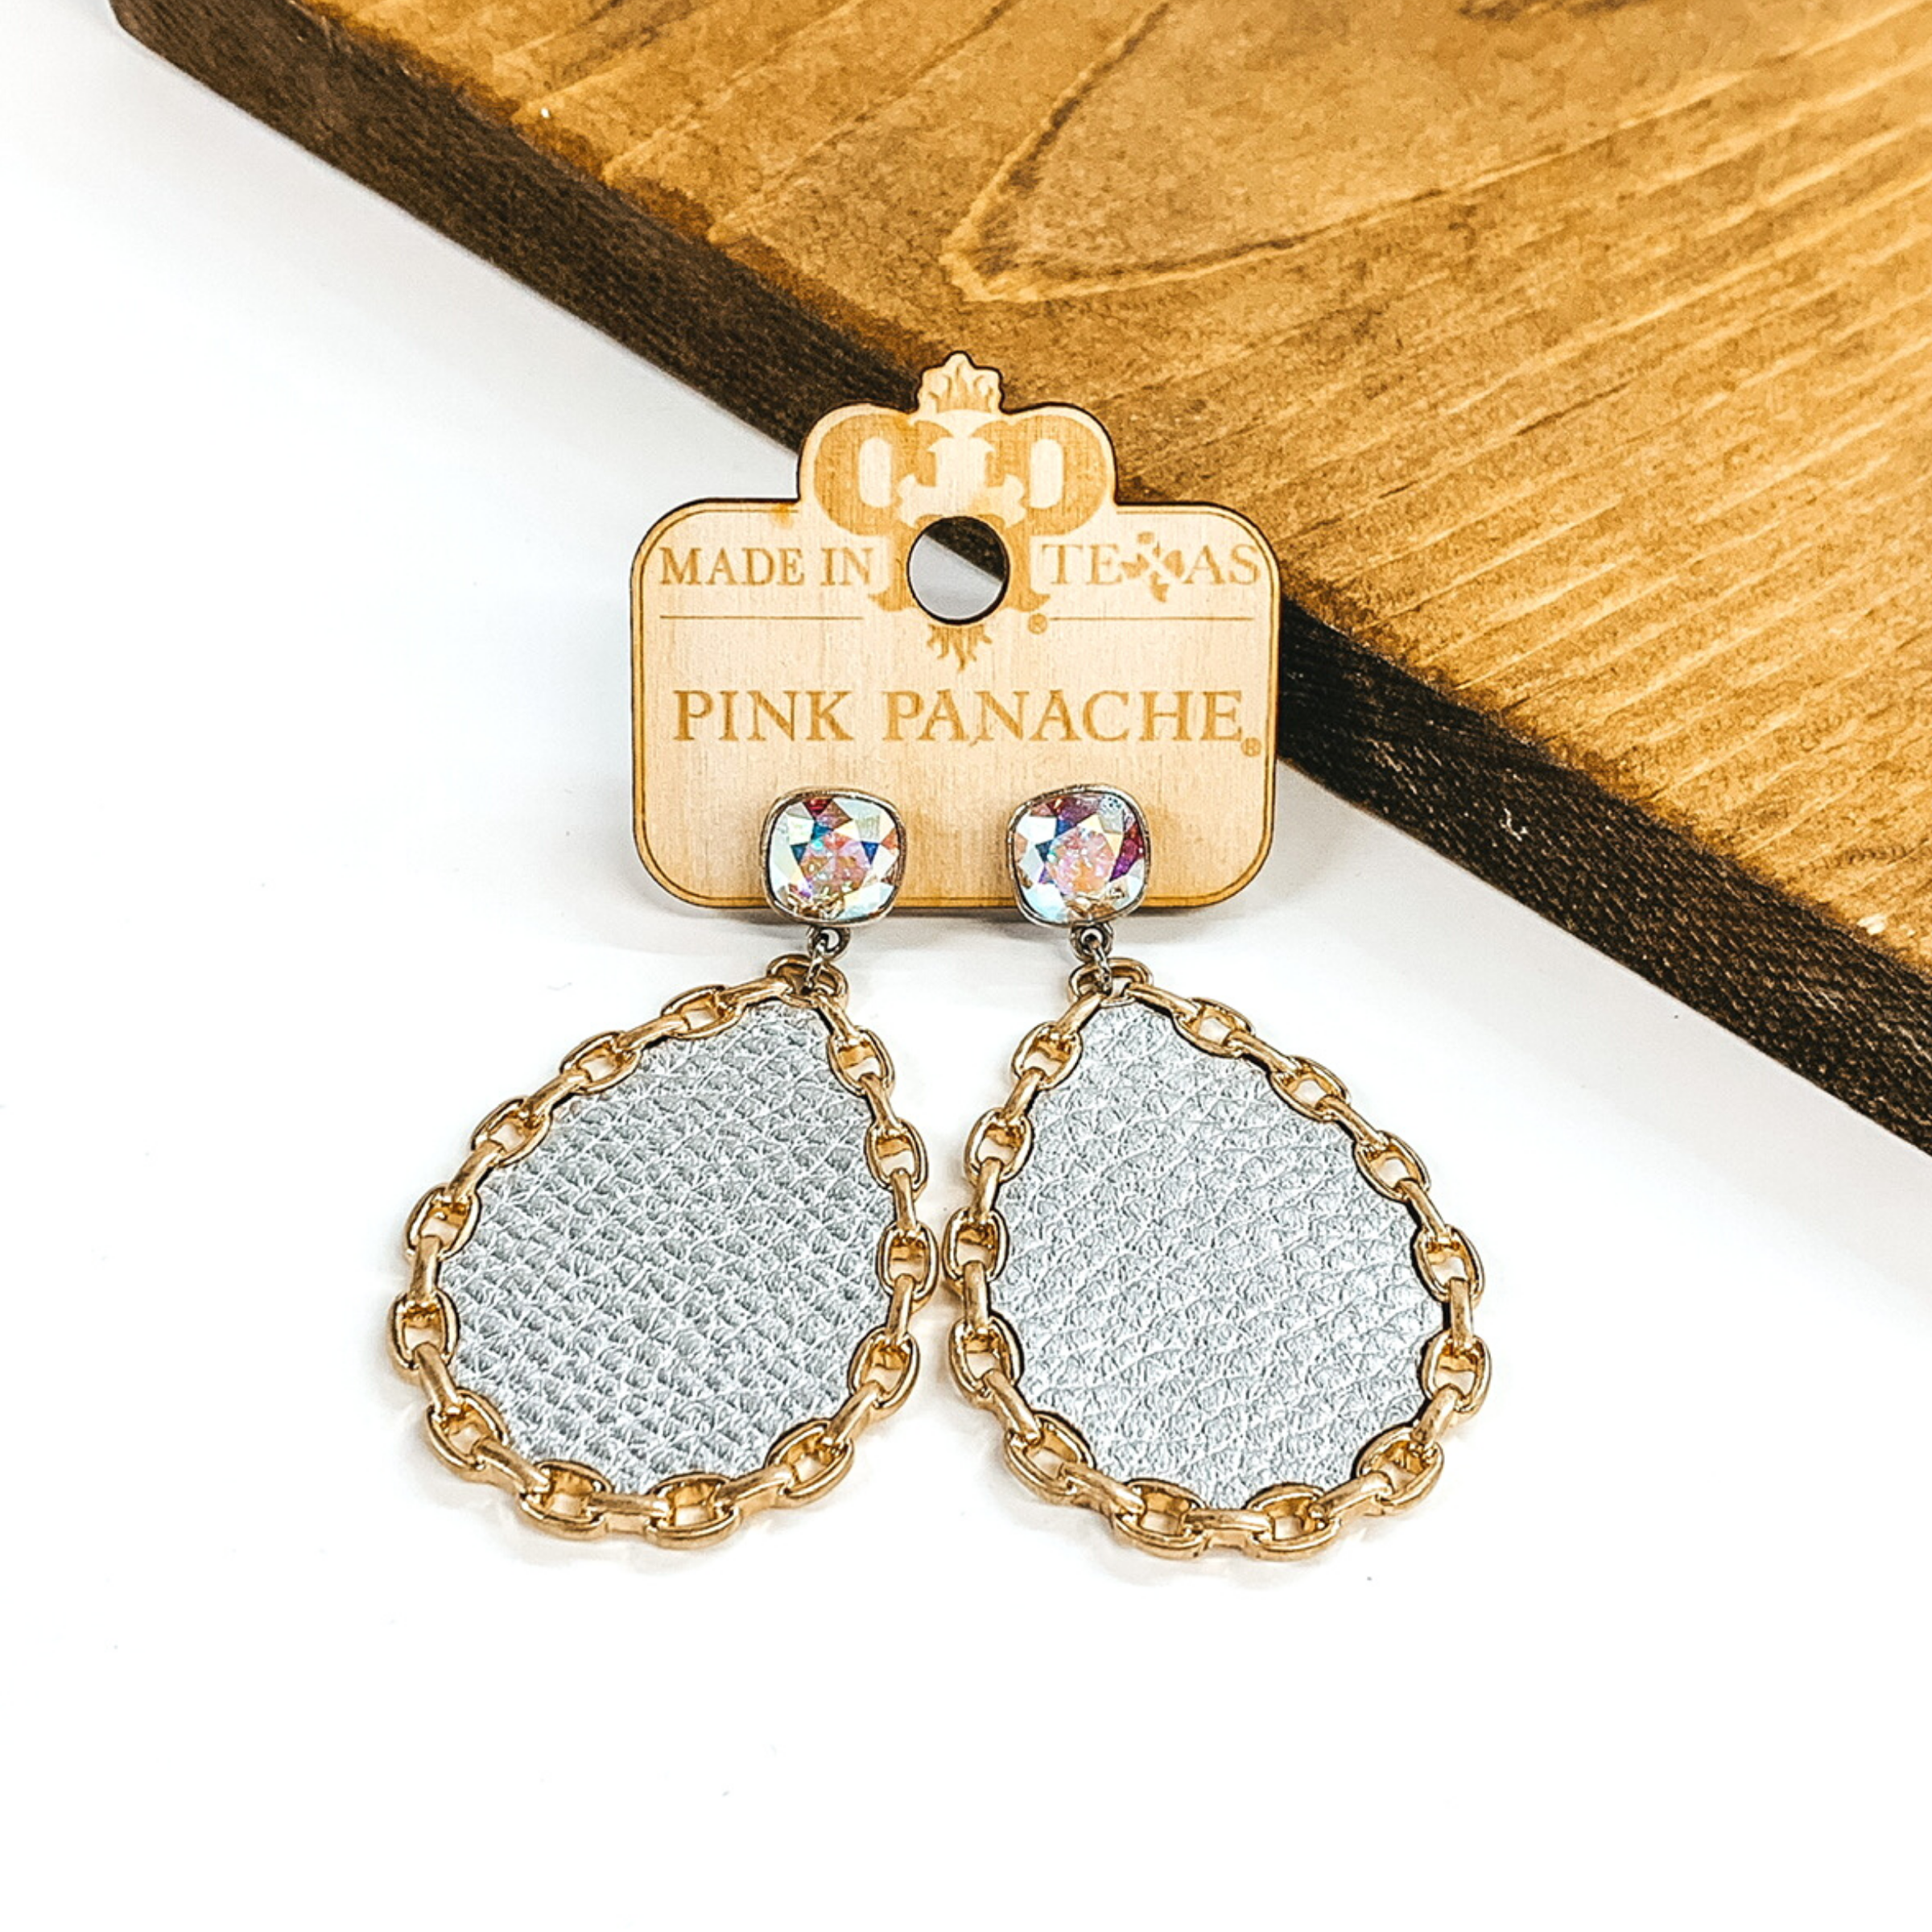 AB cushion cut crystal studs with a hanging teardrop pendant. The teardrop pendant is silver with a gold chain outline. These earrings are pictured on a white background with a piece of wood behind the earrings. 